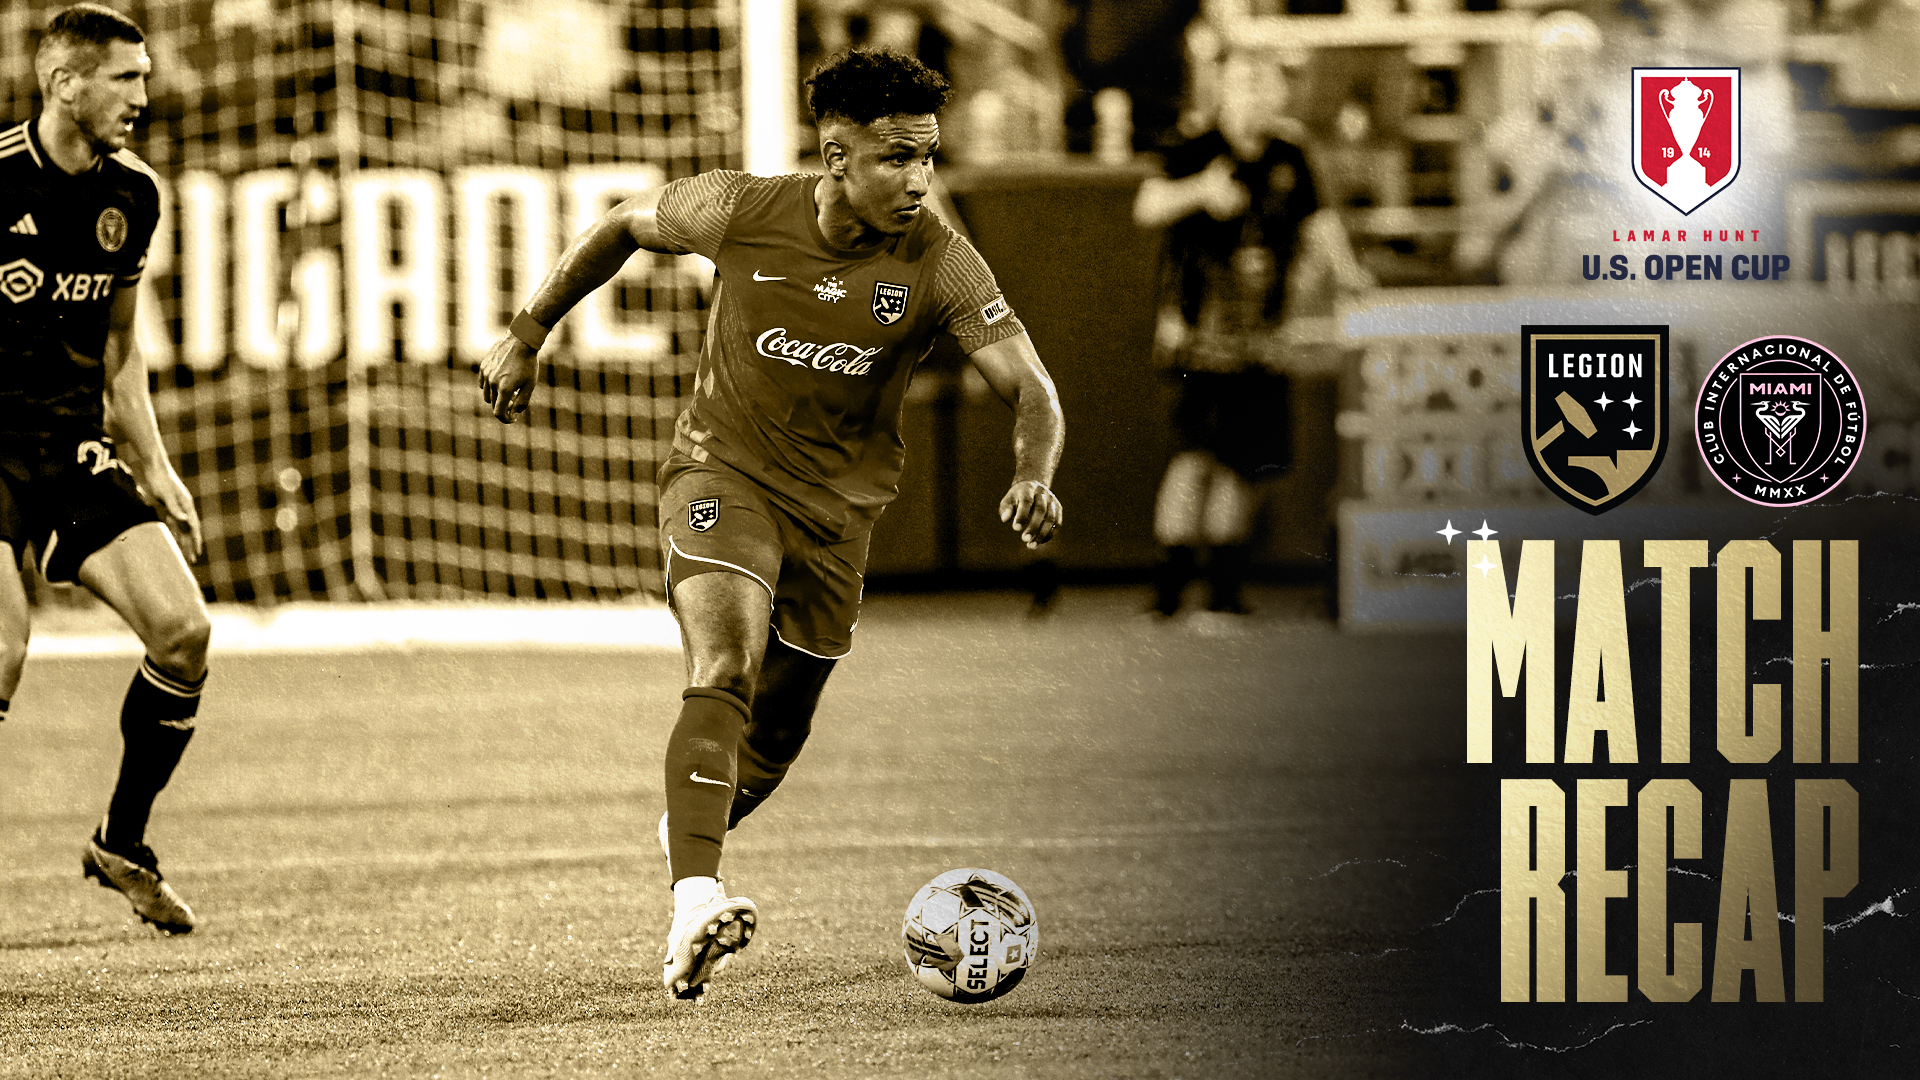 Get to know Steel FC's next opponent, Memphis 901 FC